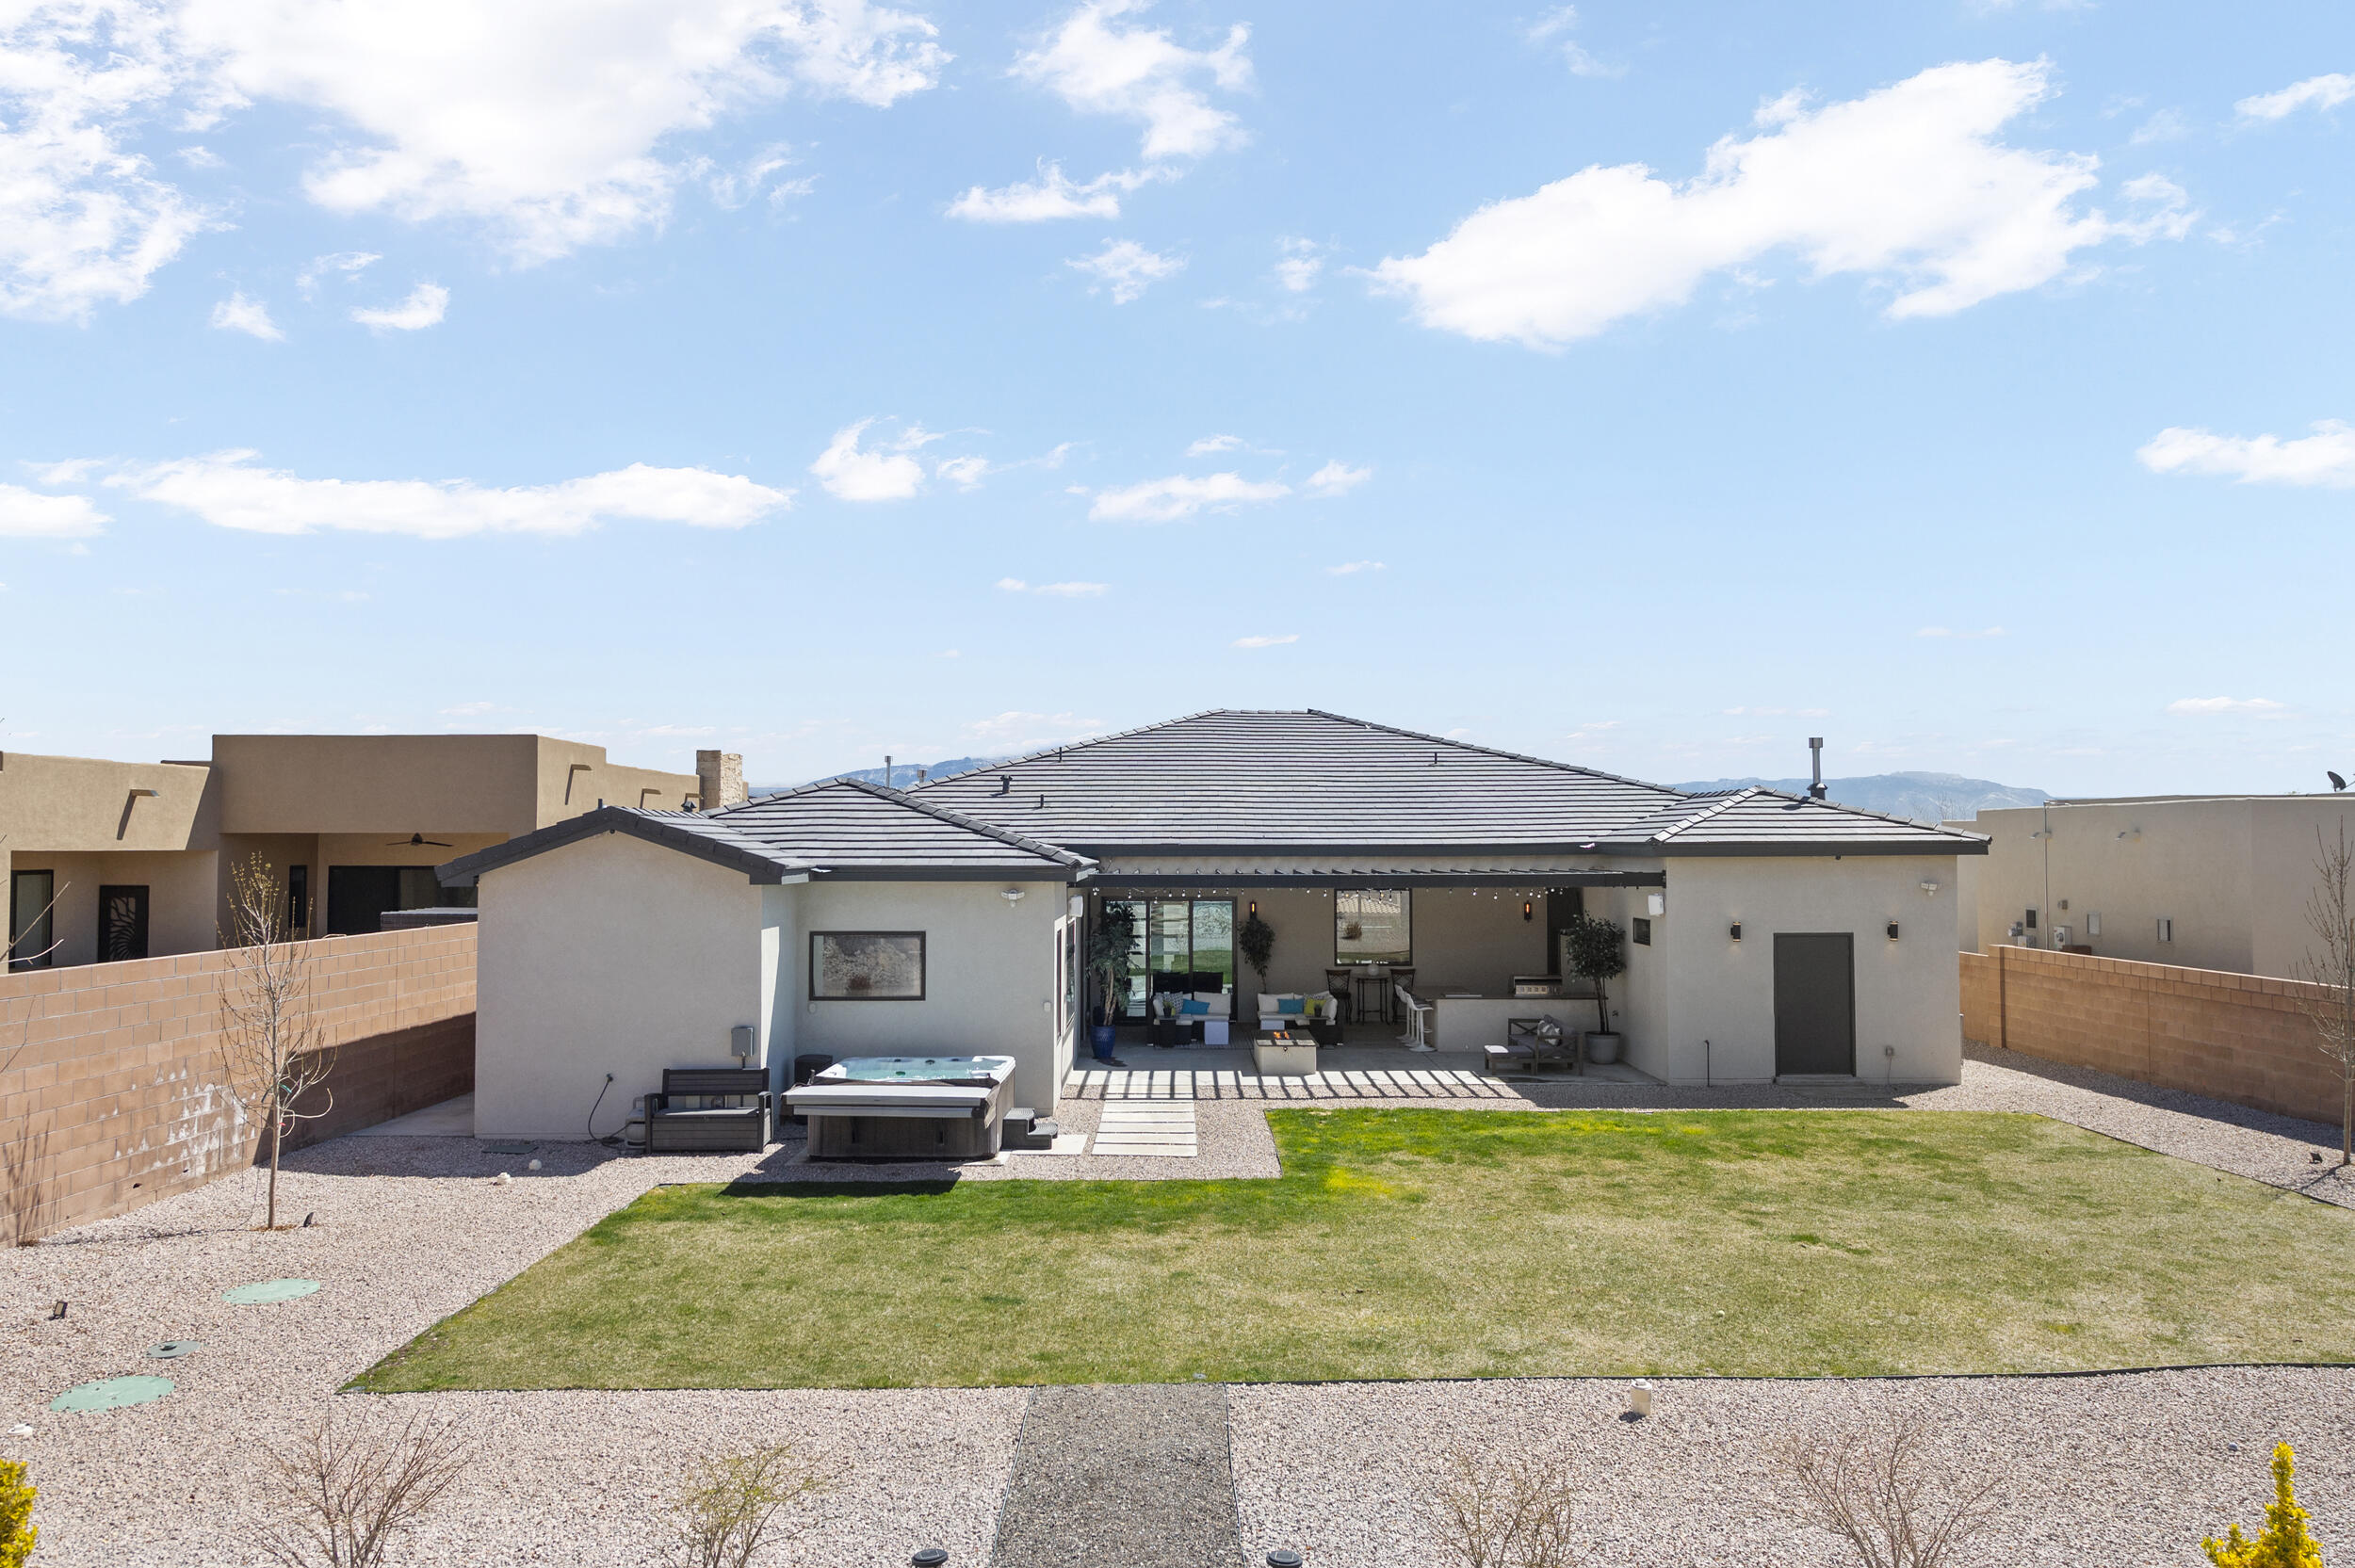 2307 13th Street SE, Rio Rancho, New Mexico 87124, 4 Bedrooms Bedrooms, ,4 BathroomsBathrooms,Residential,For Sale,2307 13th Street SE,1061343